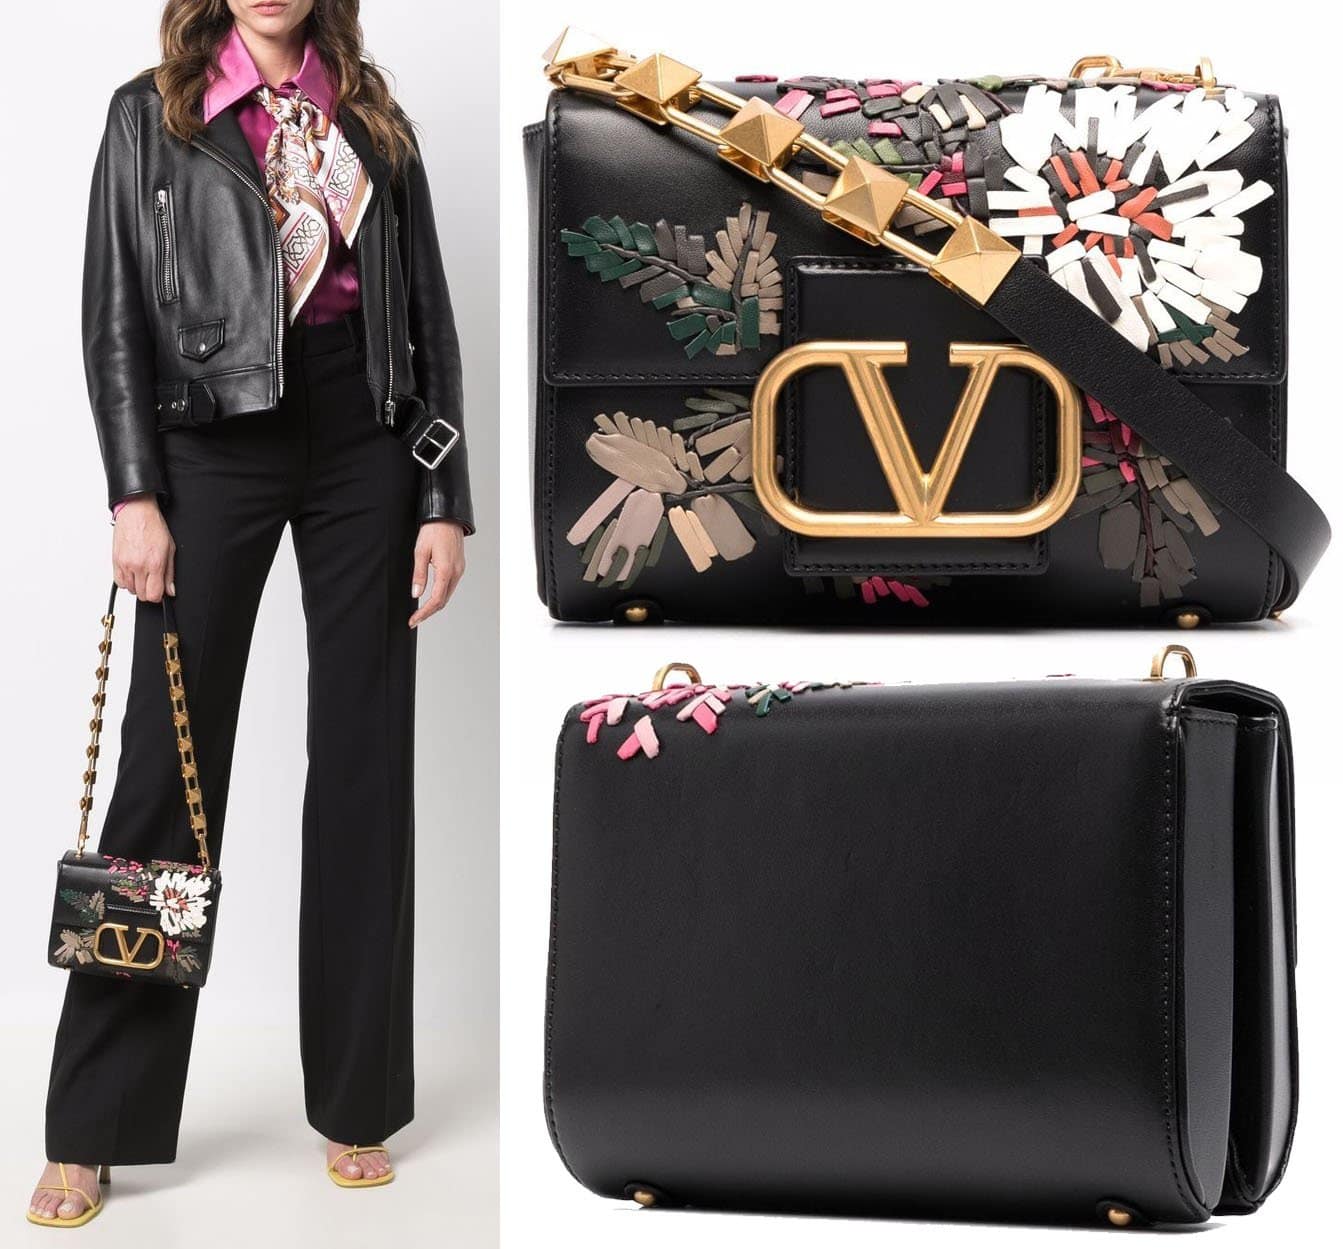 A stand-out little black bag, Valentino's Stud Sign bag features a colorful floral leather embroidery and a chain shoulder strap with iconic maxi studs